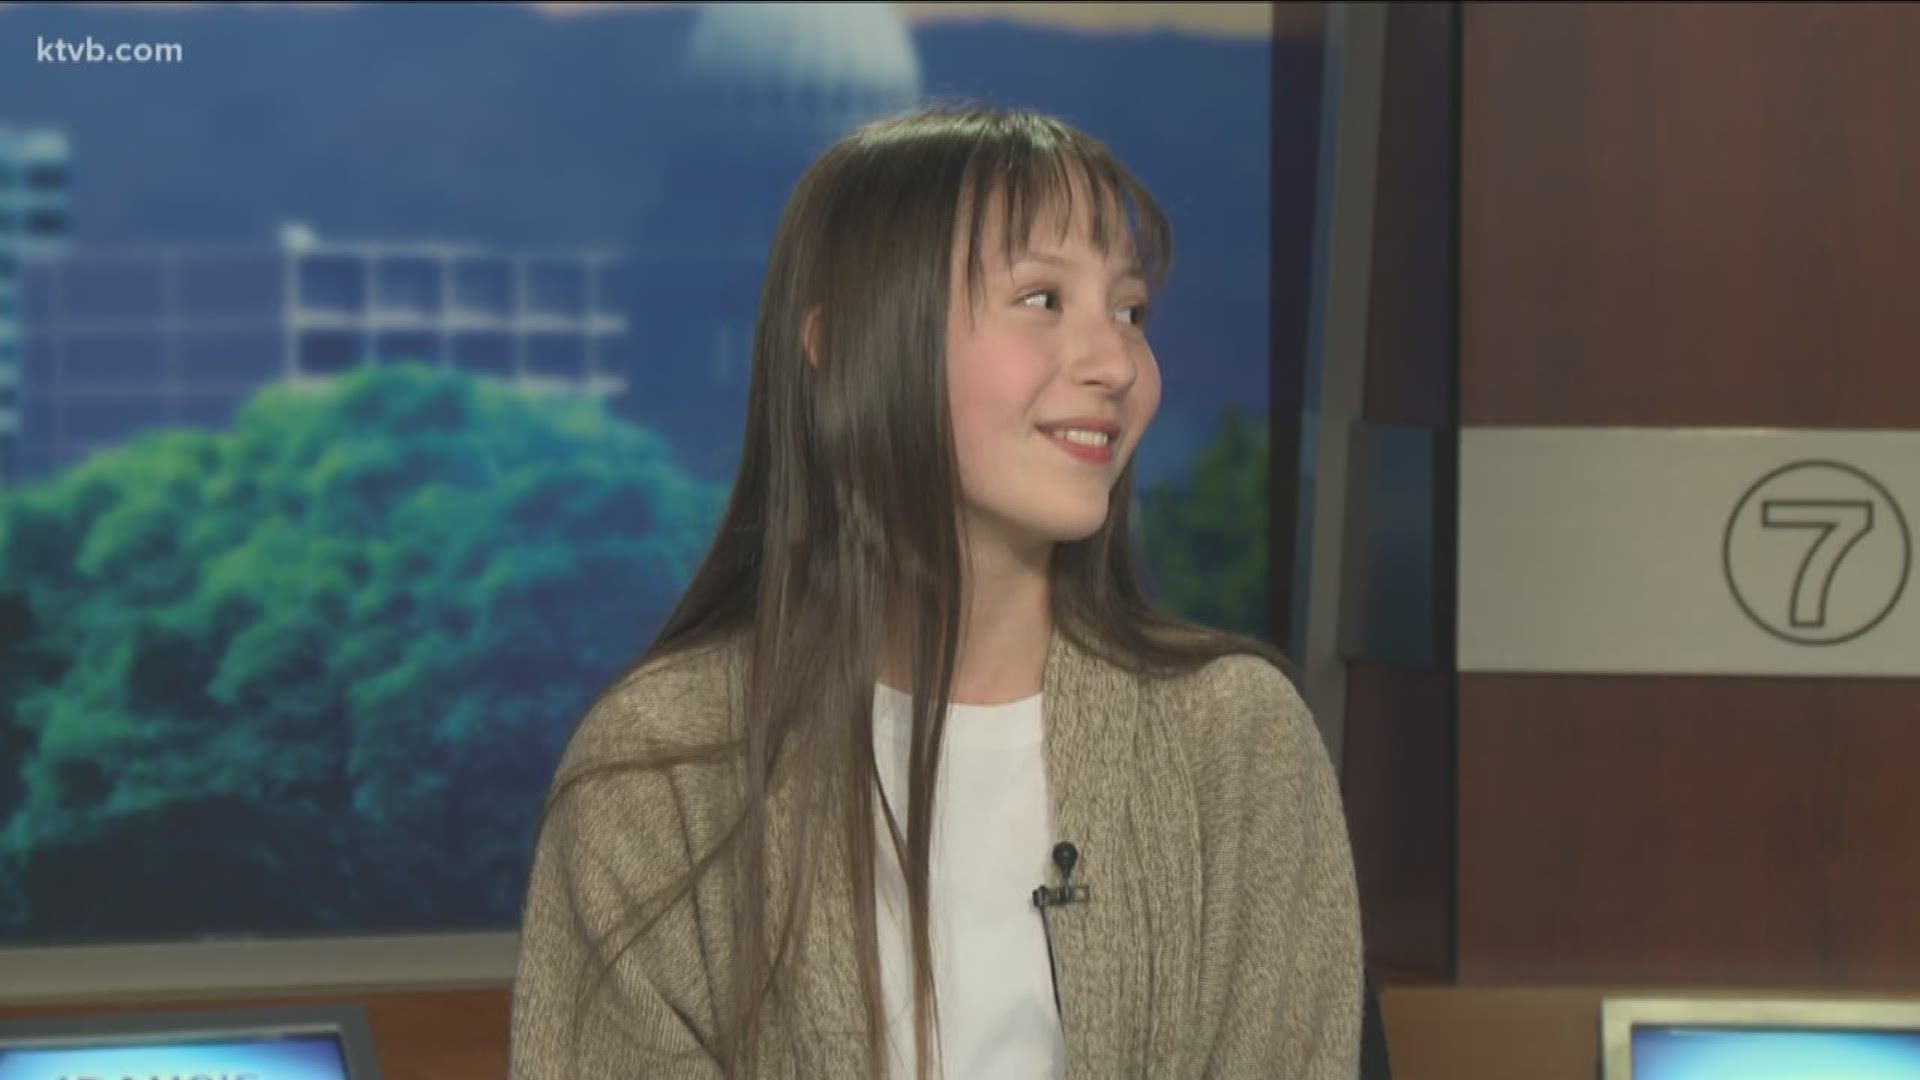 Boise 13 Year Old Singer In Baby Shark Viral Hit Admits The Song